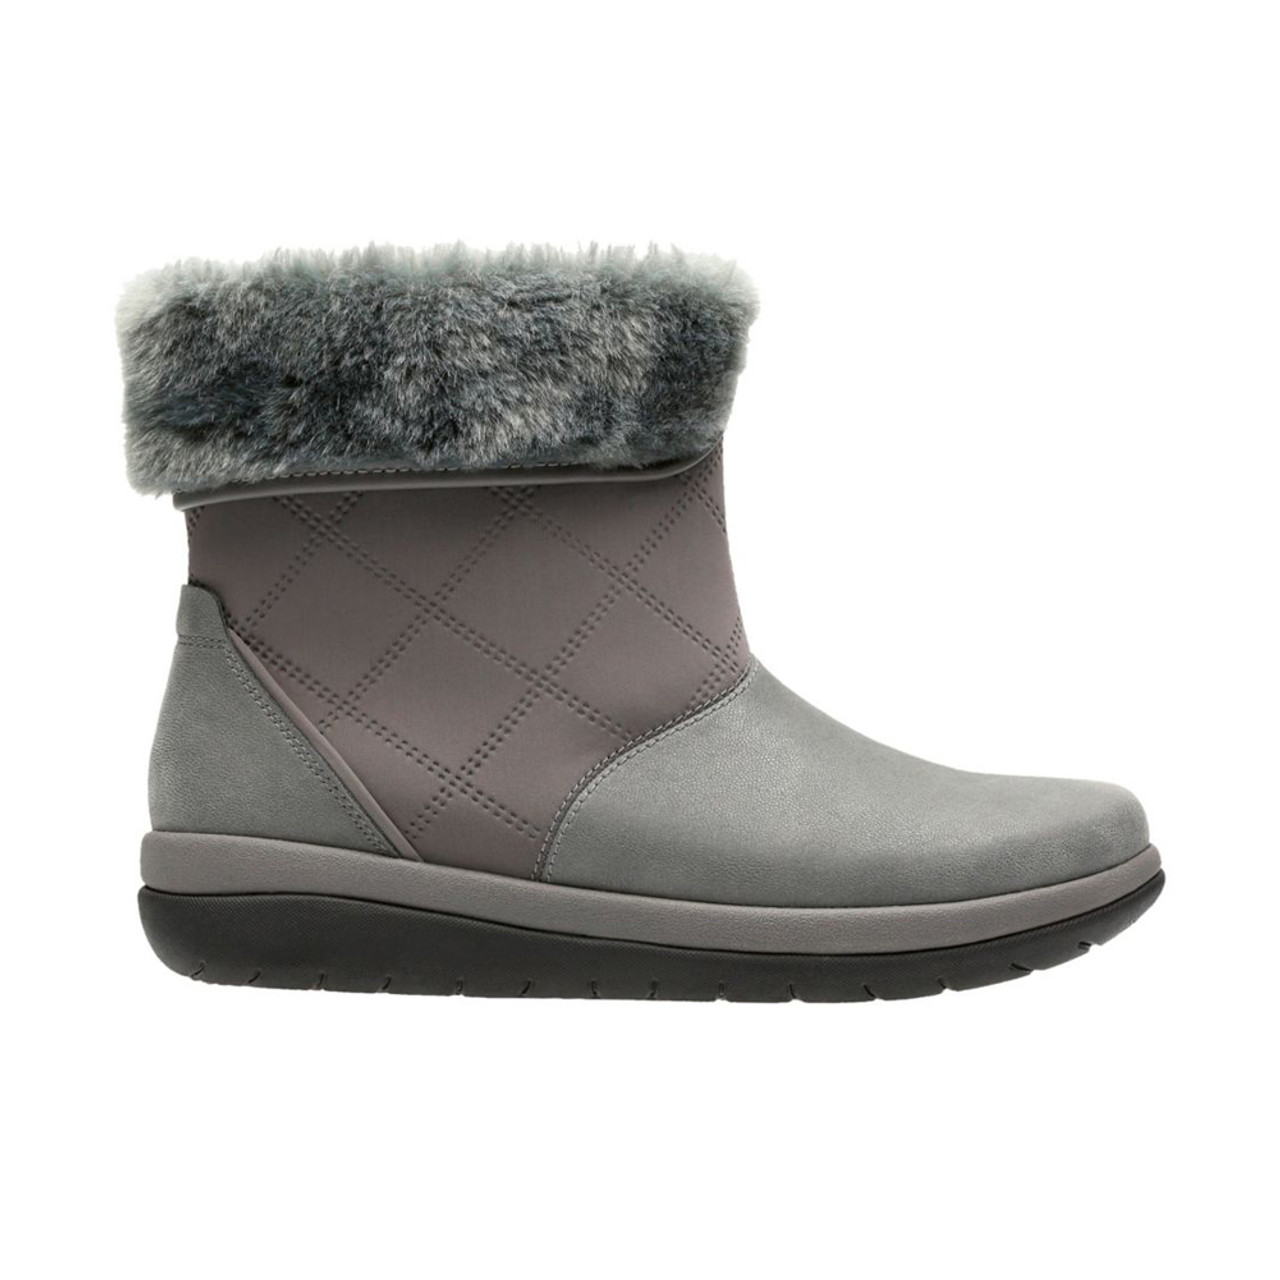 clarks winter snow boots